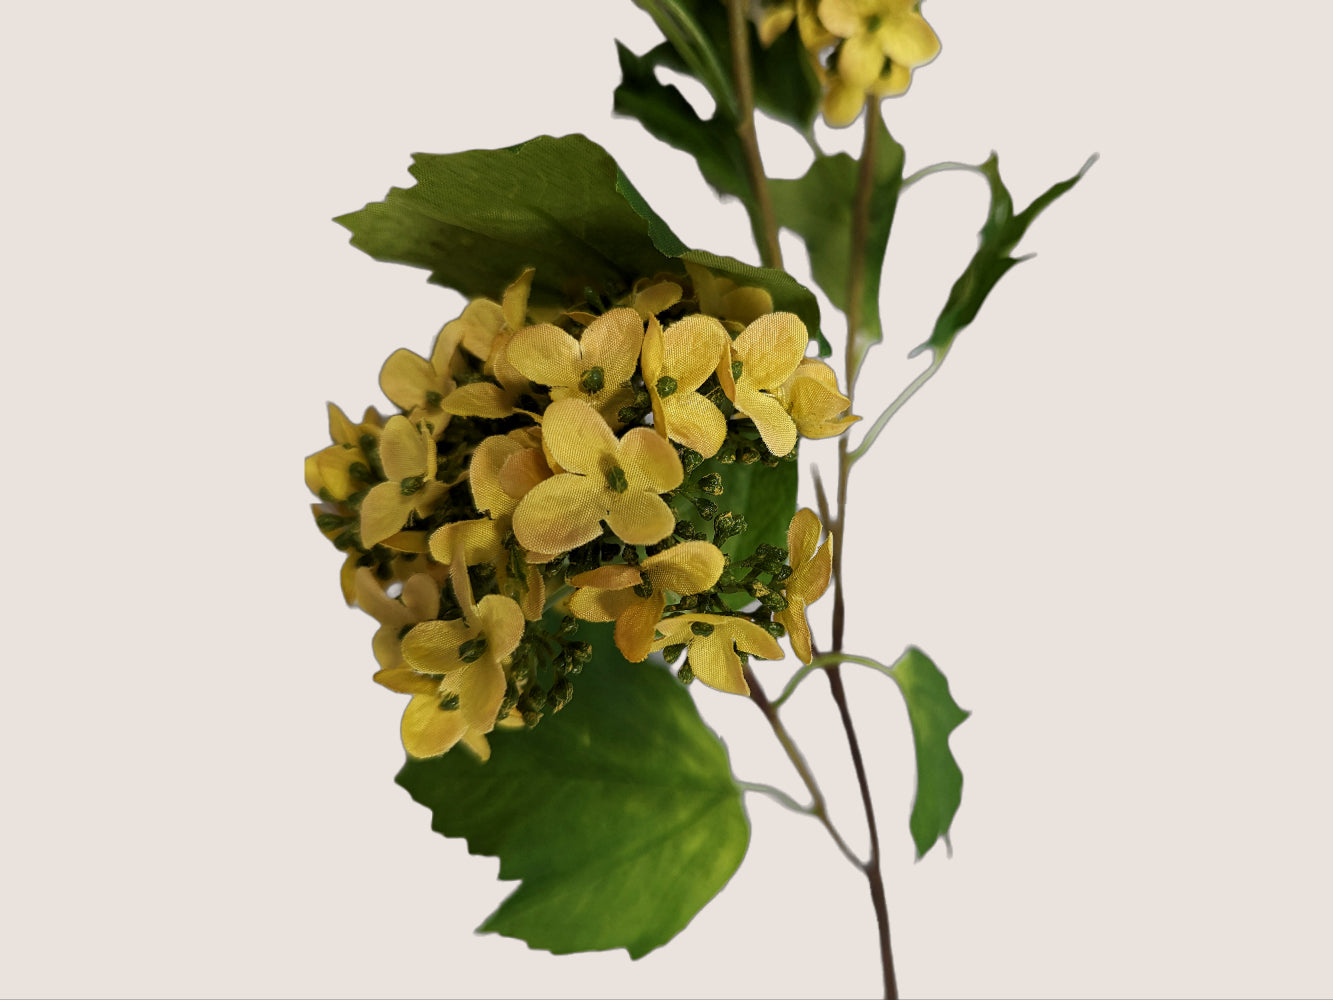 Close up of an artificial yellow snowball hydrangea faux flower, measuring 24 inches in height (13 inches for the stem and 11 inches for the floral blooms and branches). Each stem features three blooms of small, medium, and large sizes. The image is shown against a neutral beige background.